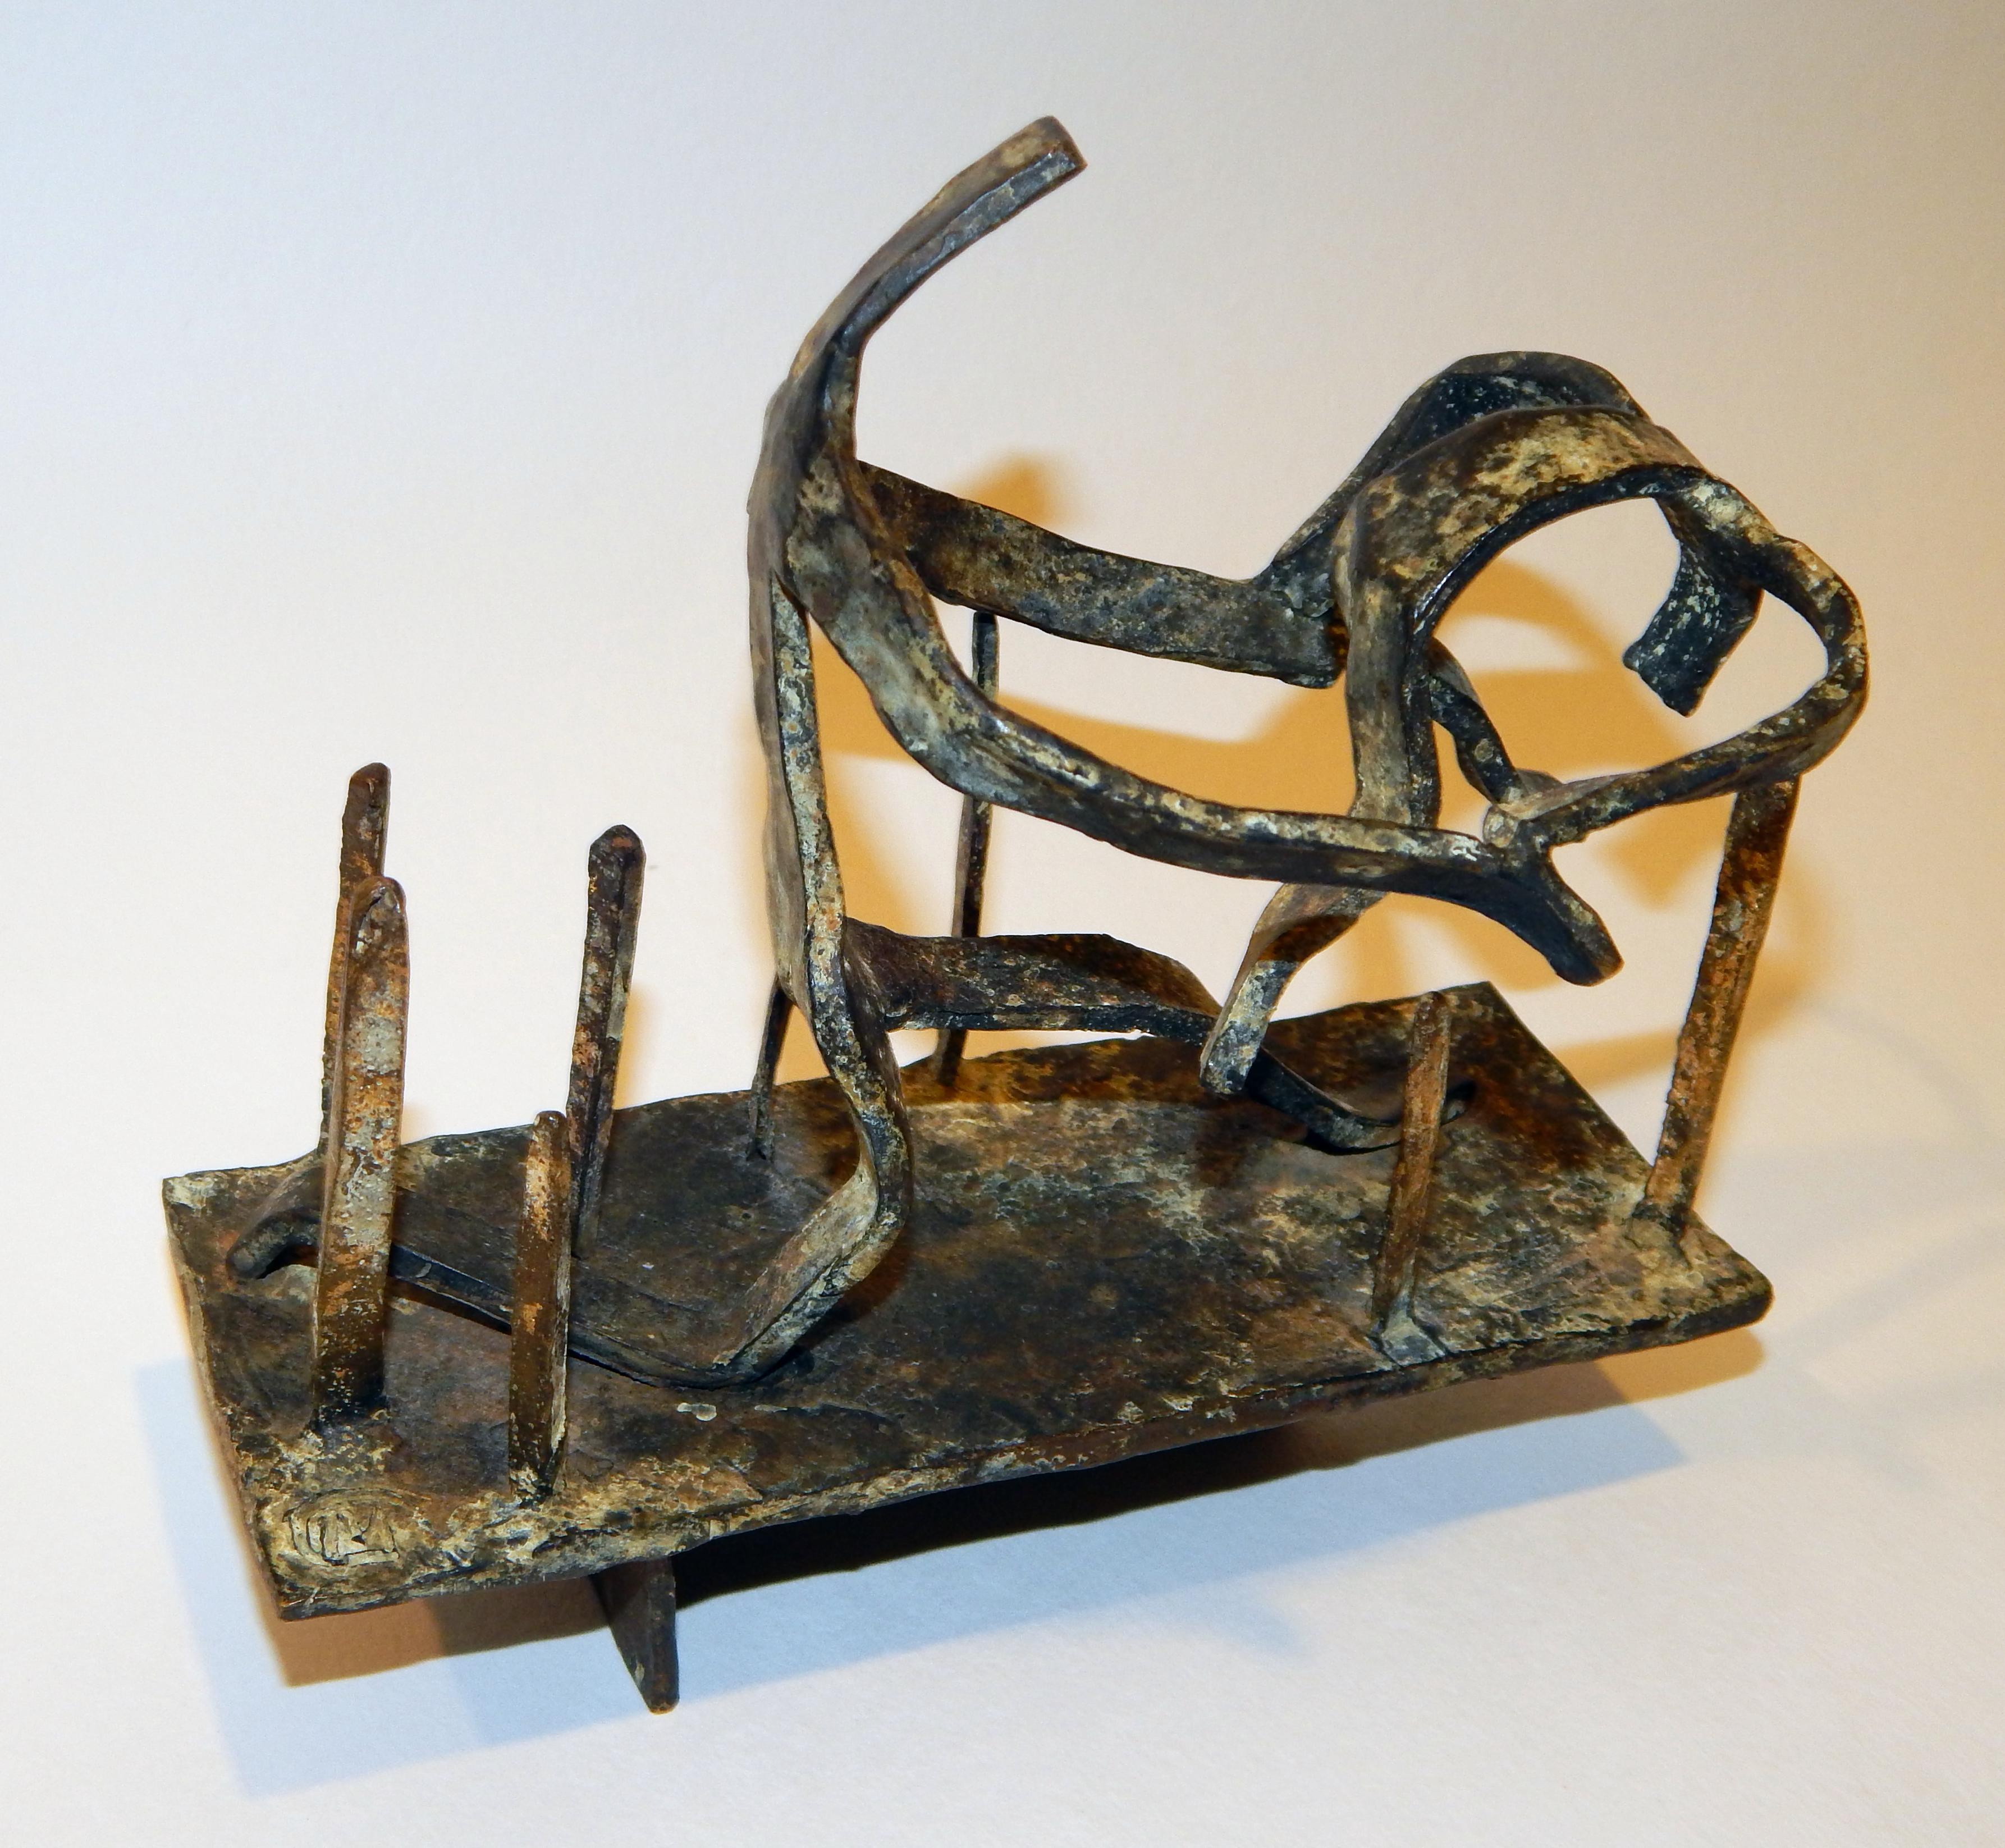 Abstract bronze by New York and Parisian woman artist Mary Callery (1903-1977).
She was born in New York in 1903 to a wealthy family and was raised in Pittsburgh.
Callery studied at the Art Students League, NY with Edward McCarten and in Paris